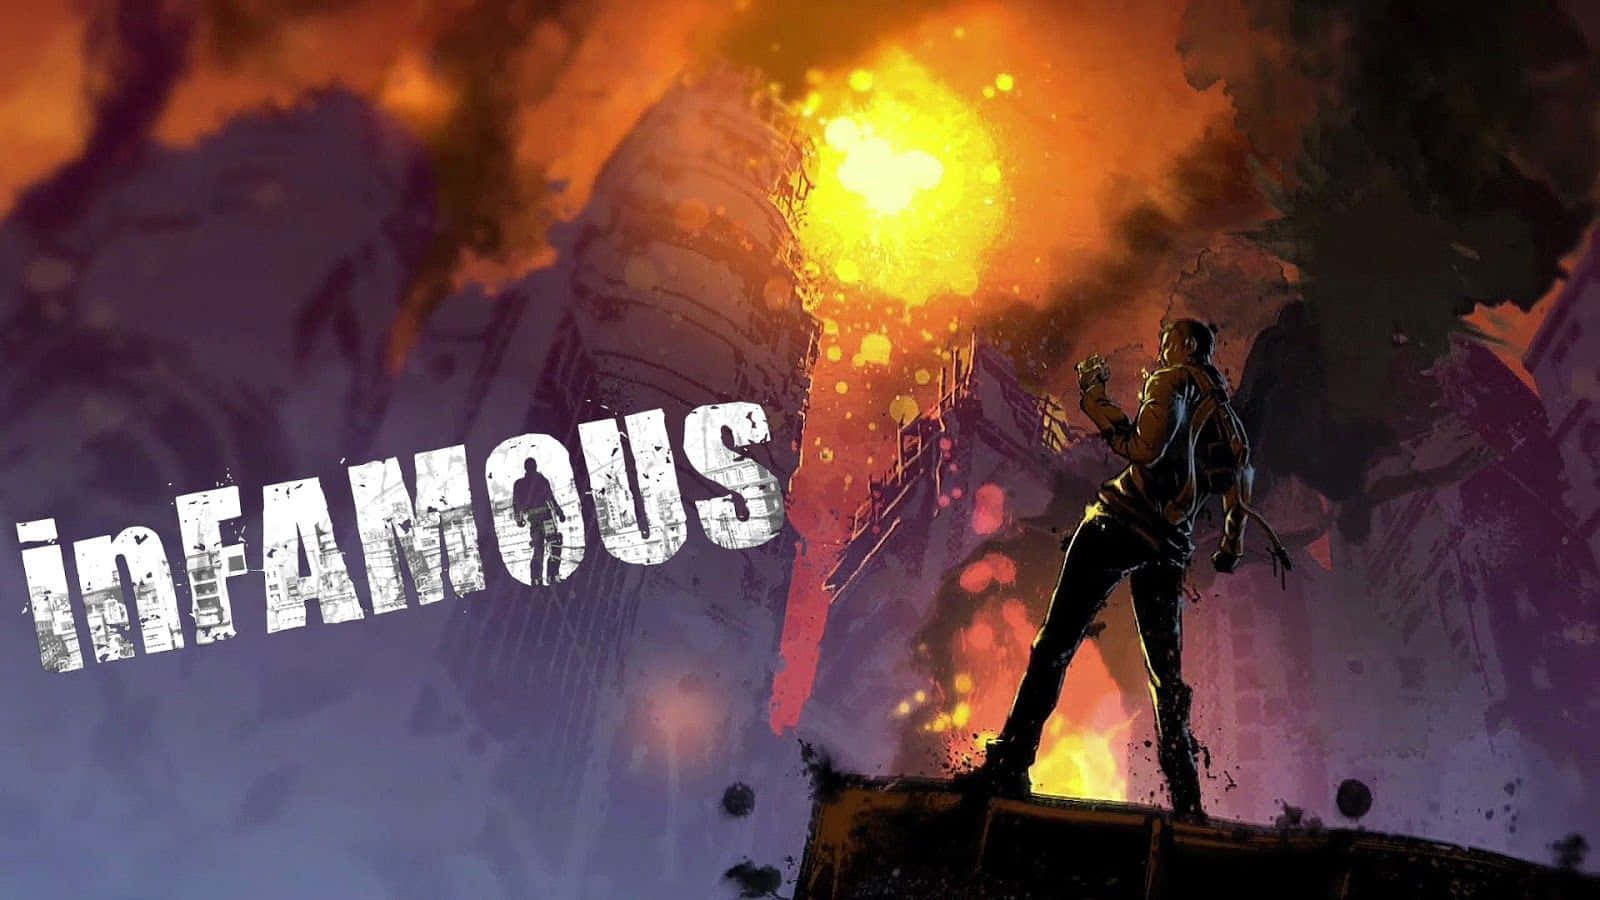 Infamous Man In A Burning City Wallpaper Wallpaper